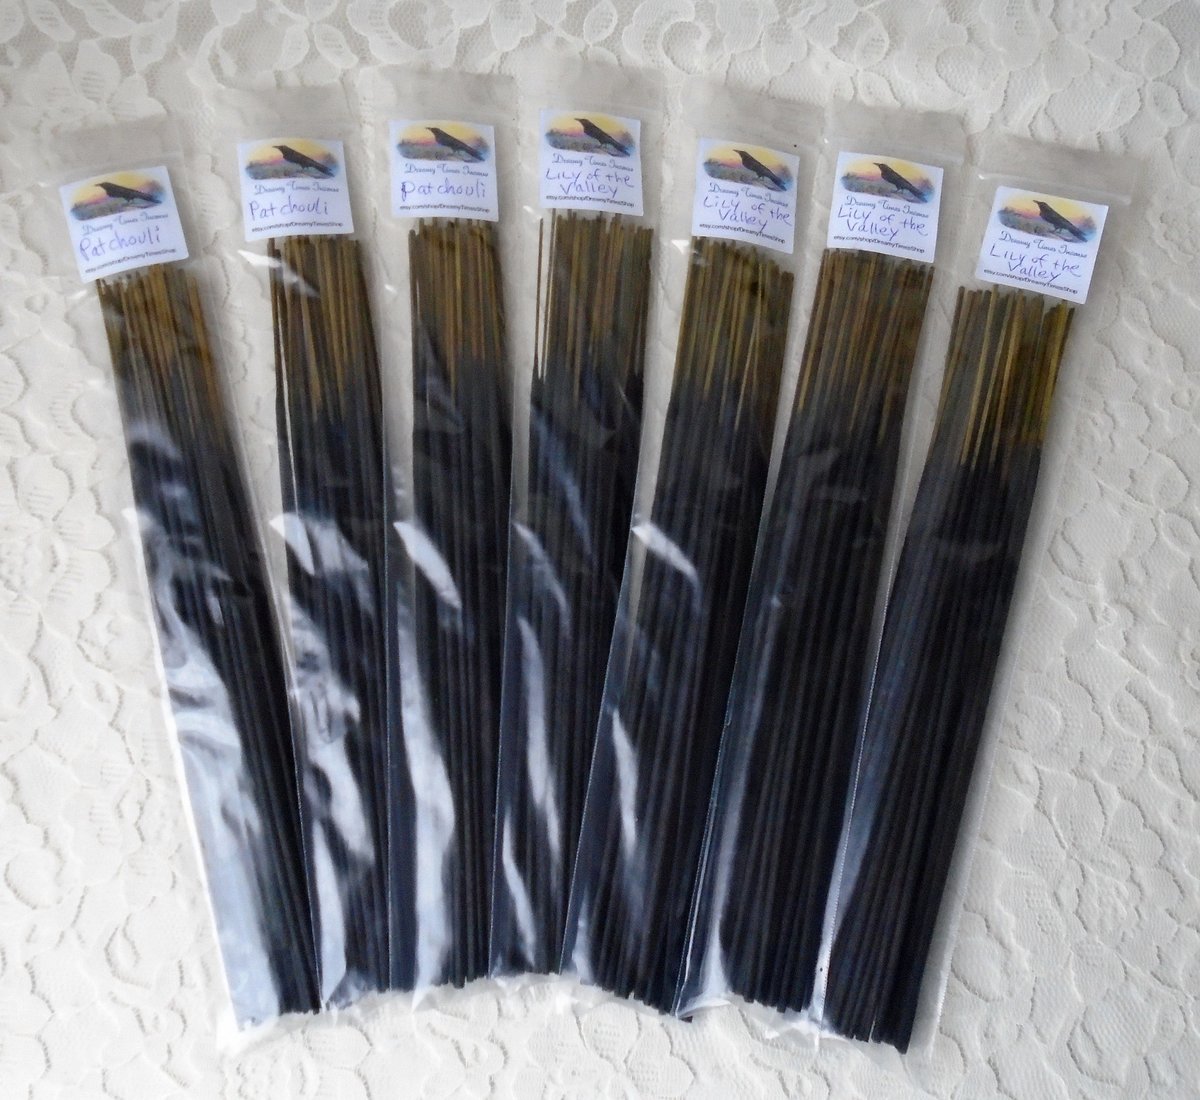 Incense Hot Buttered Rum Fresh Hand Dipped Charcoal 20 Sticks Home Fragrance Handmade Gift Holidays Entertaining